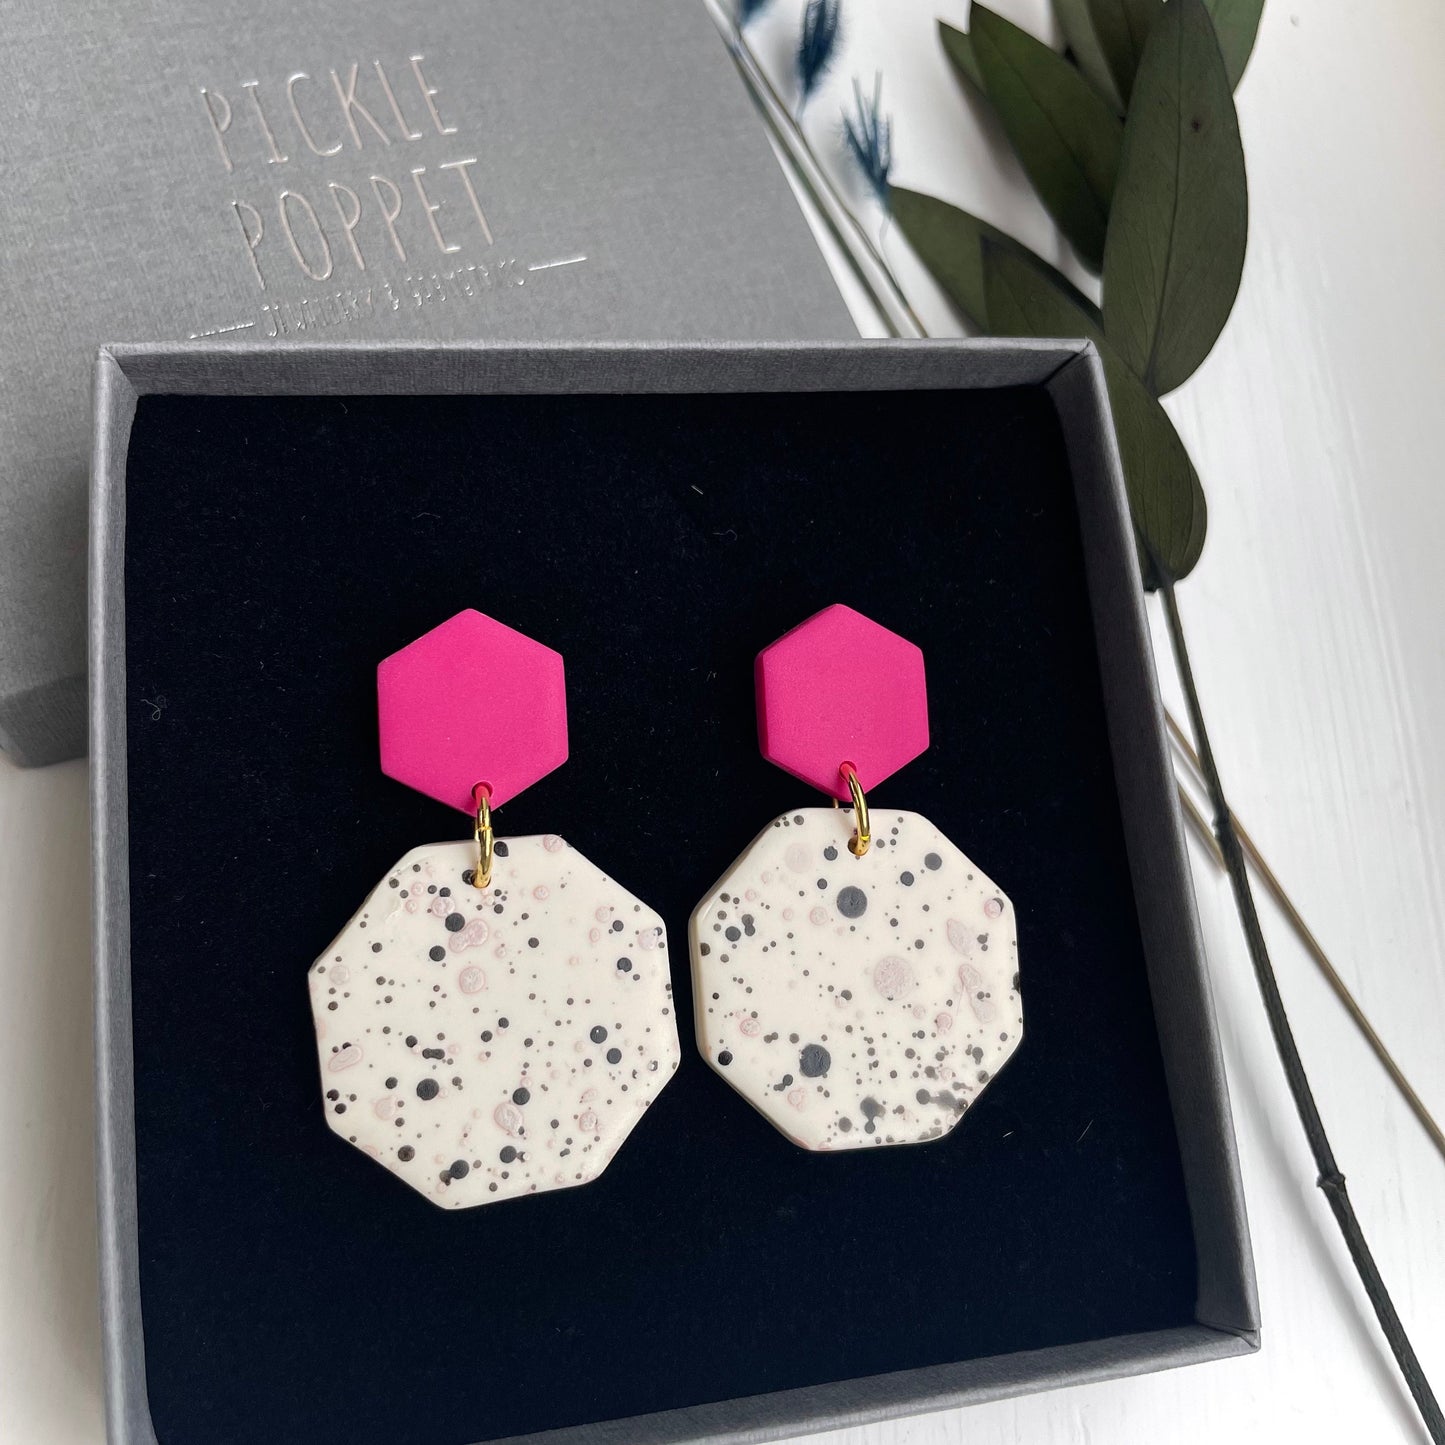 Spill Statement Earrings - Pink and Black